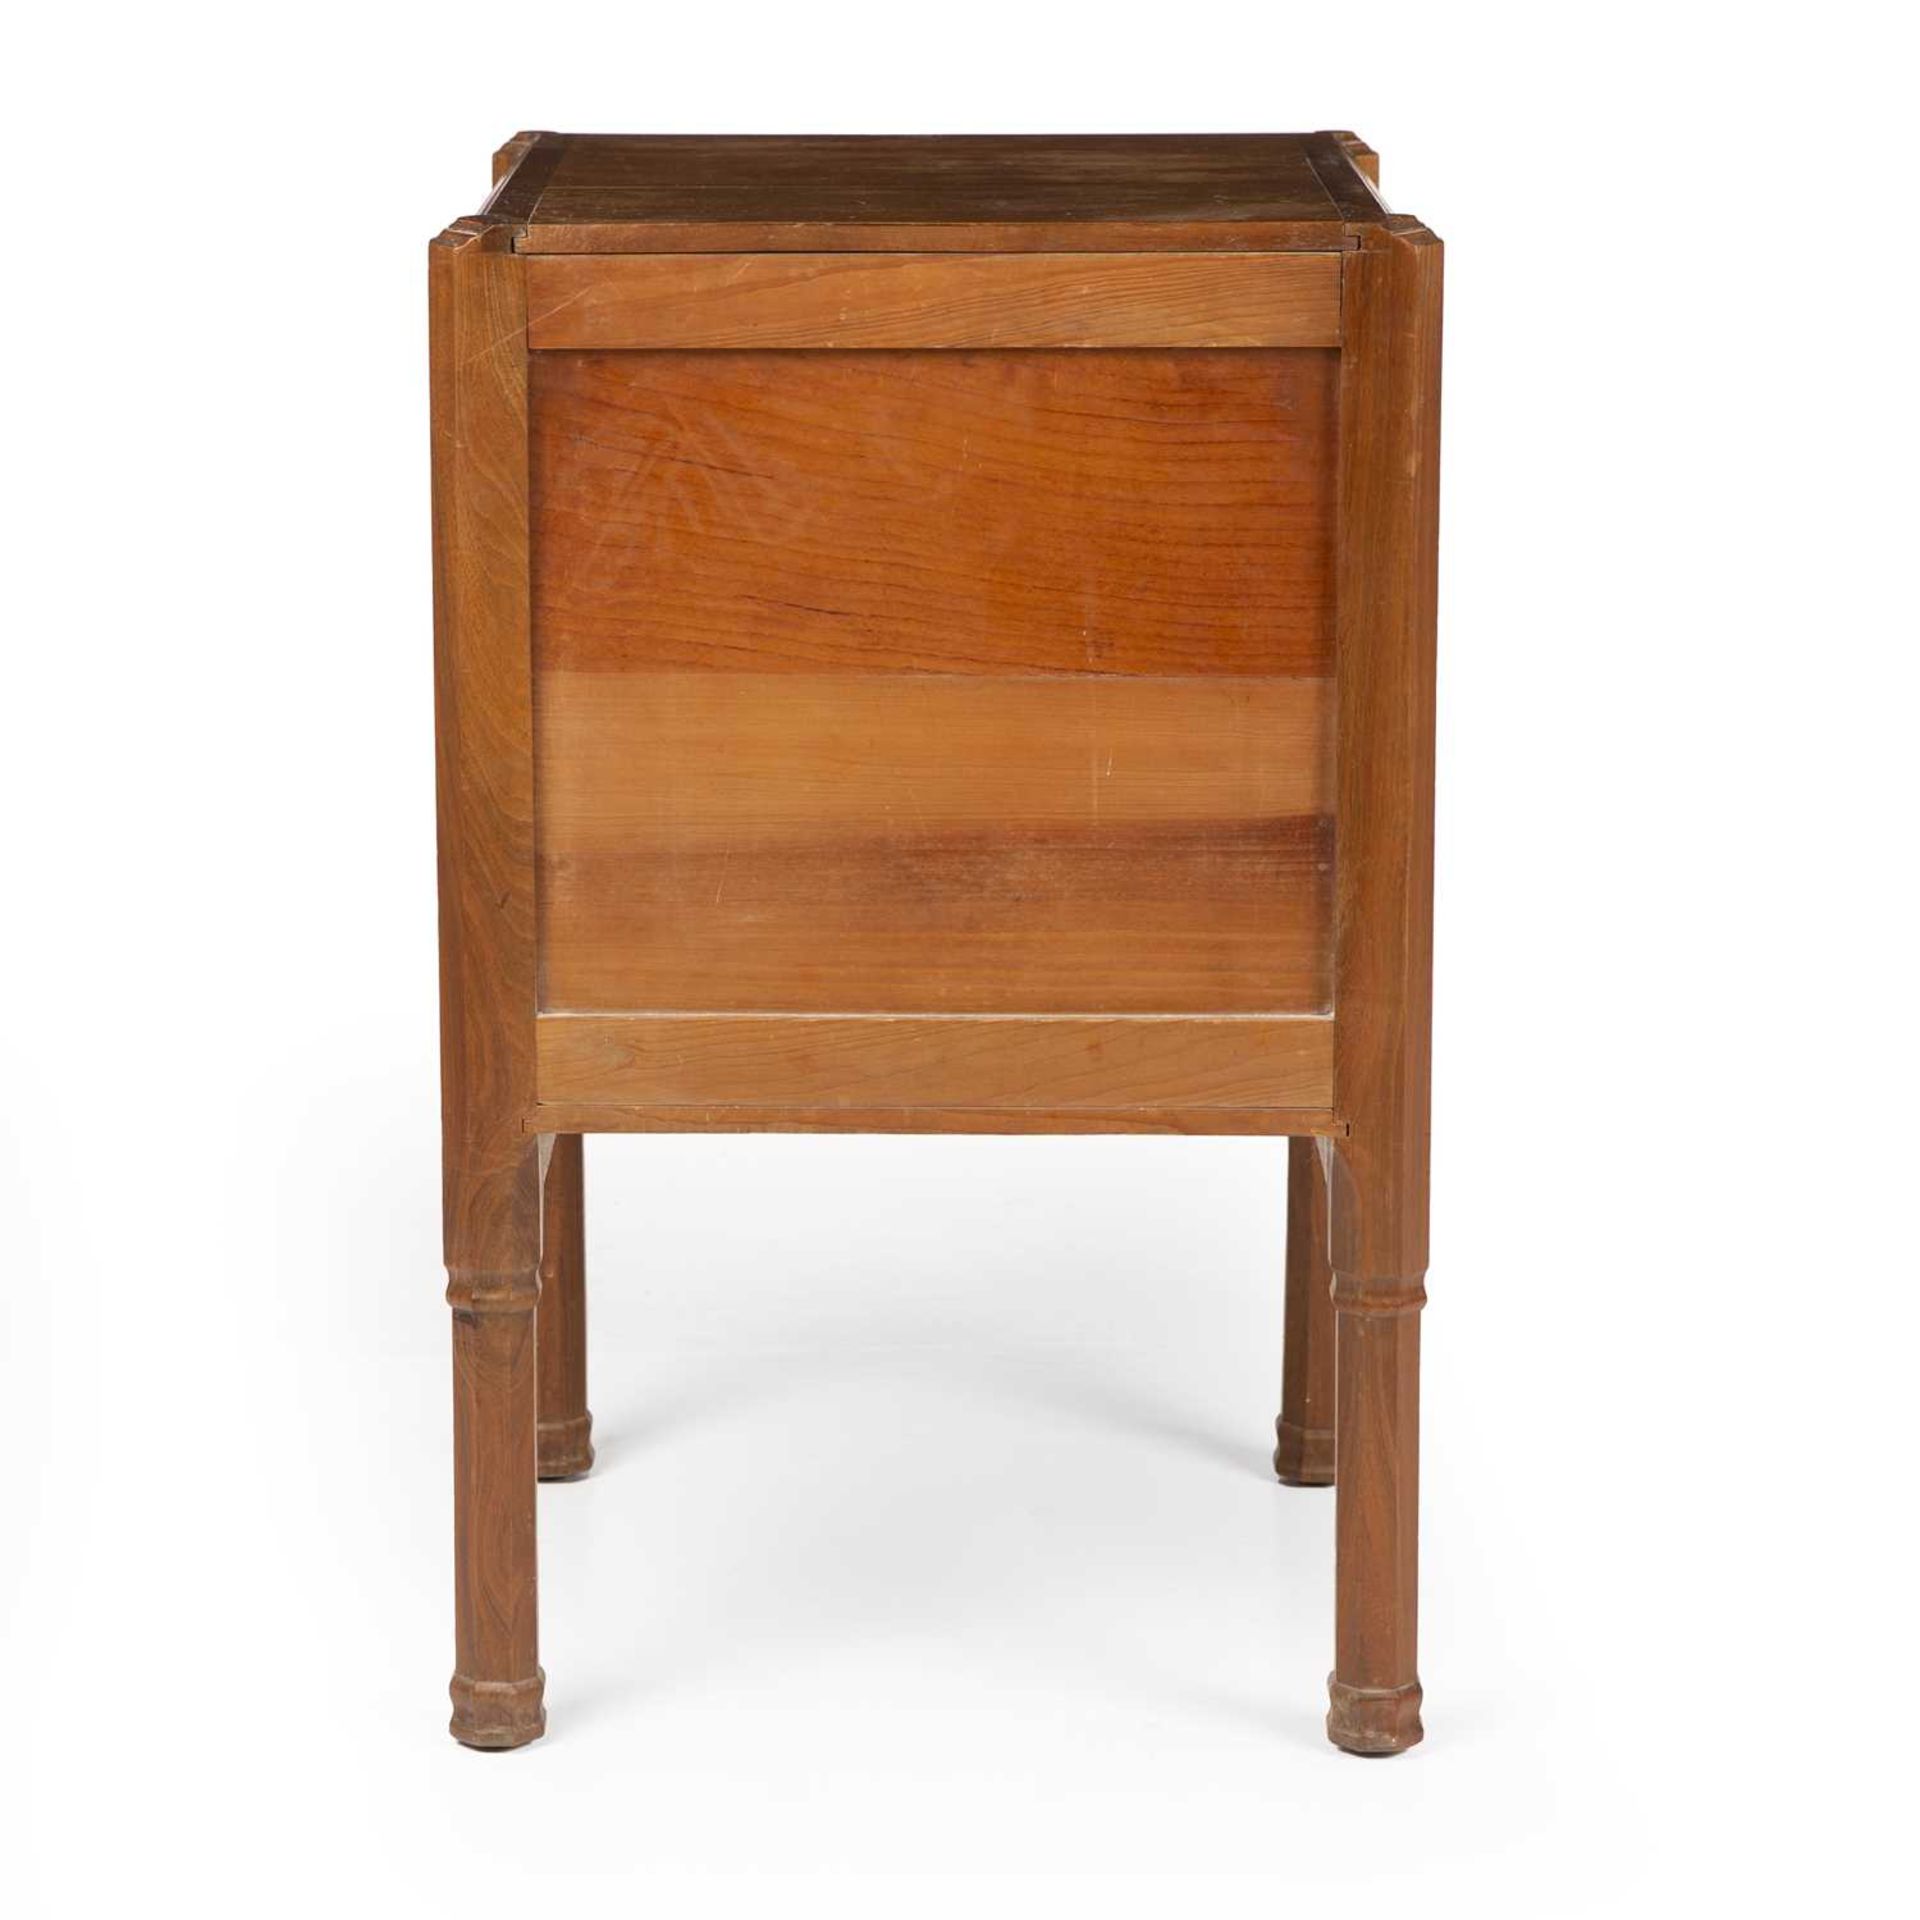 Gordon Russell (1892-1980) Bedside cabinet walnut, with two drawers with ebony handles above - Image 3 of 6